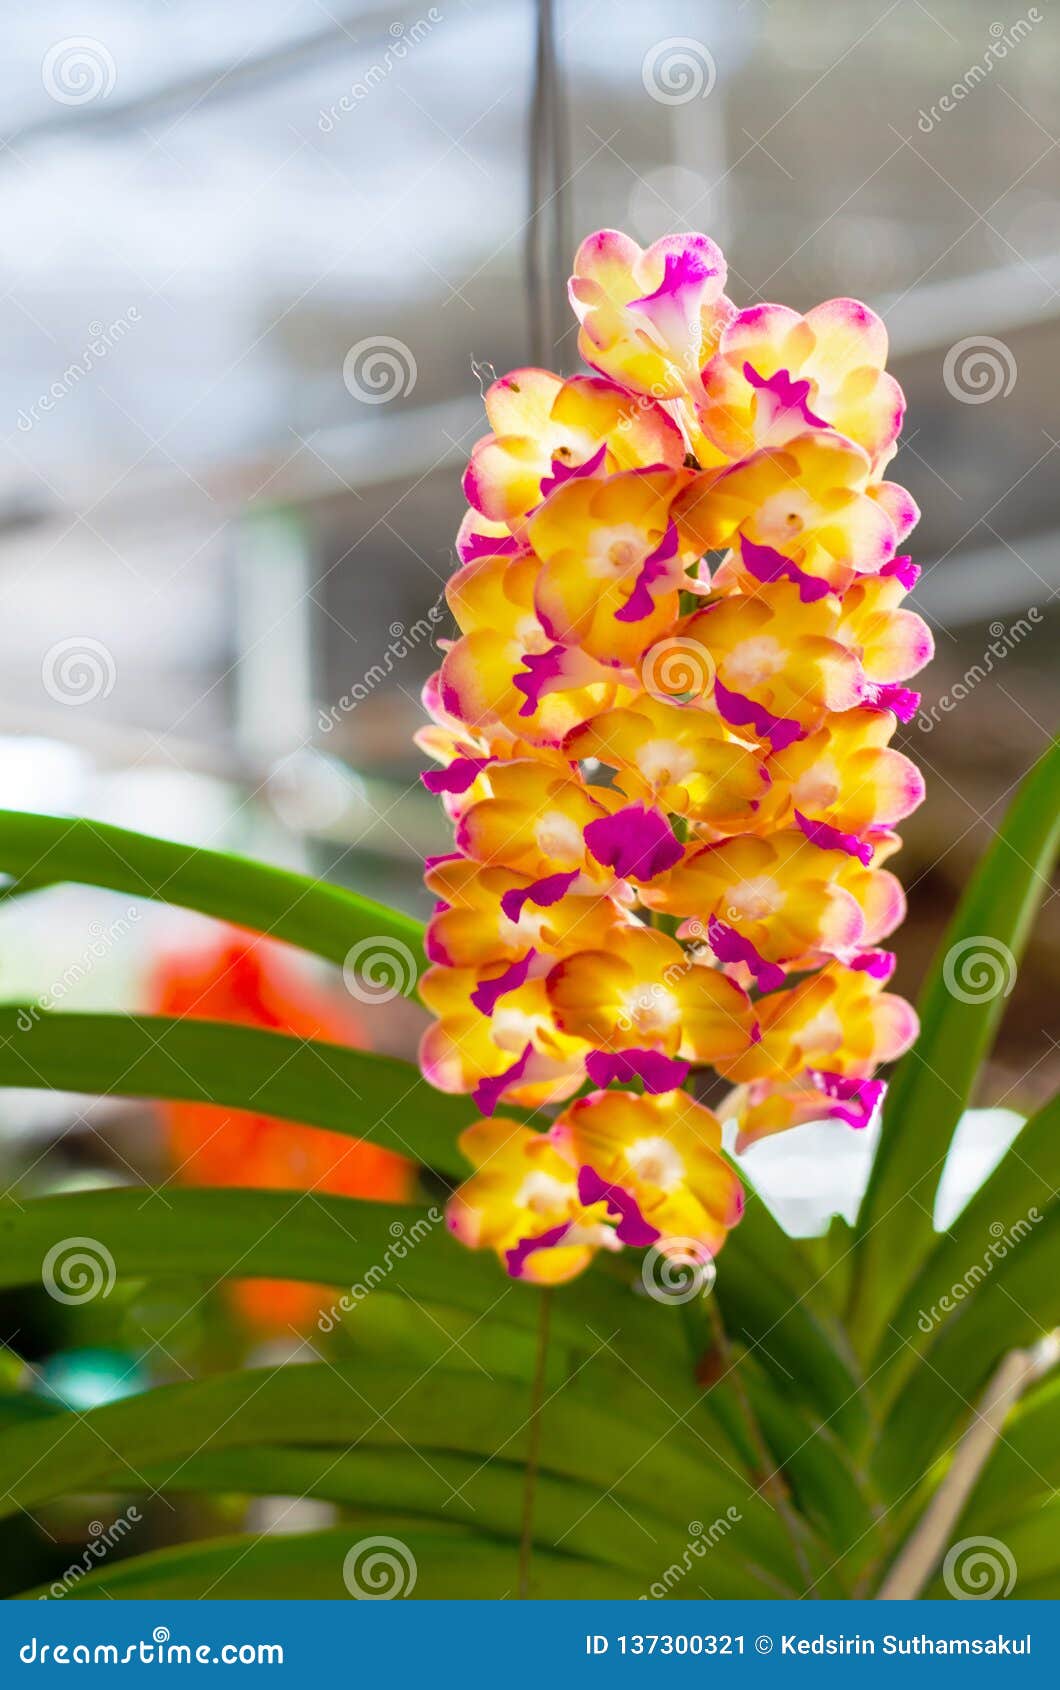 Beautiful of Vanda Hybrid Orchid Hanging in Flower Pot Stock Image - Image  of branch, fresh: 137300321